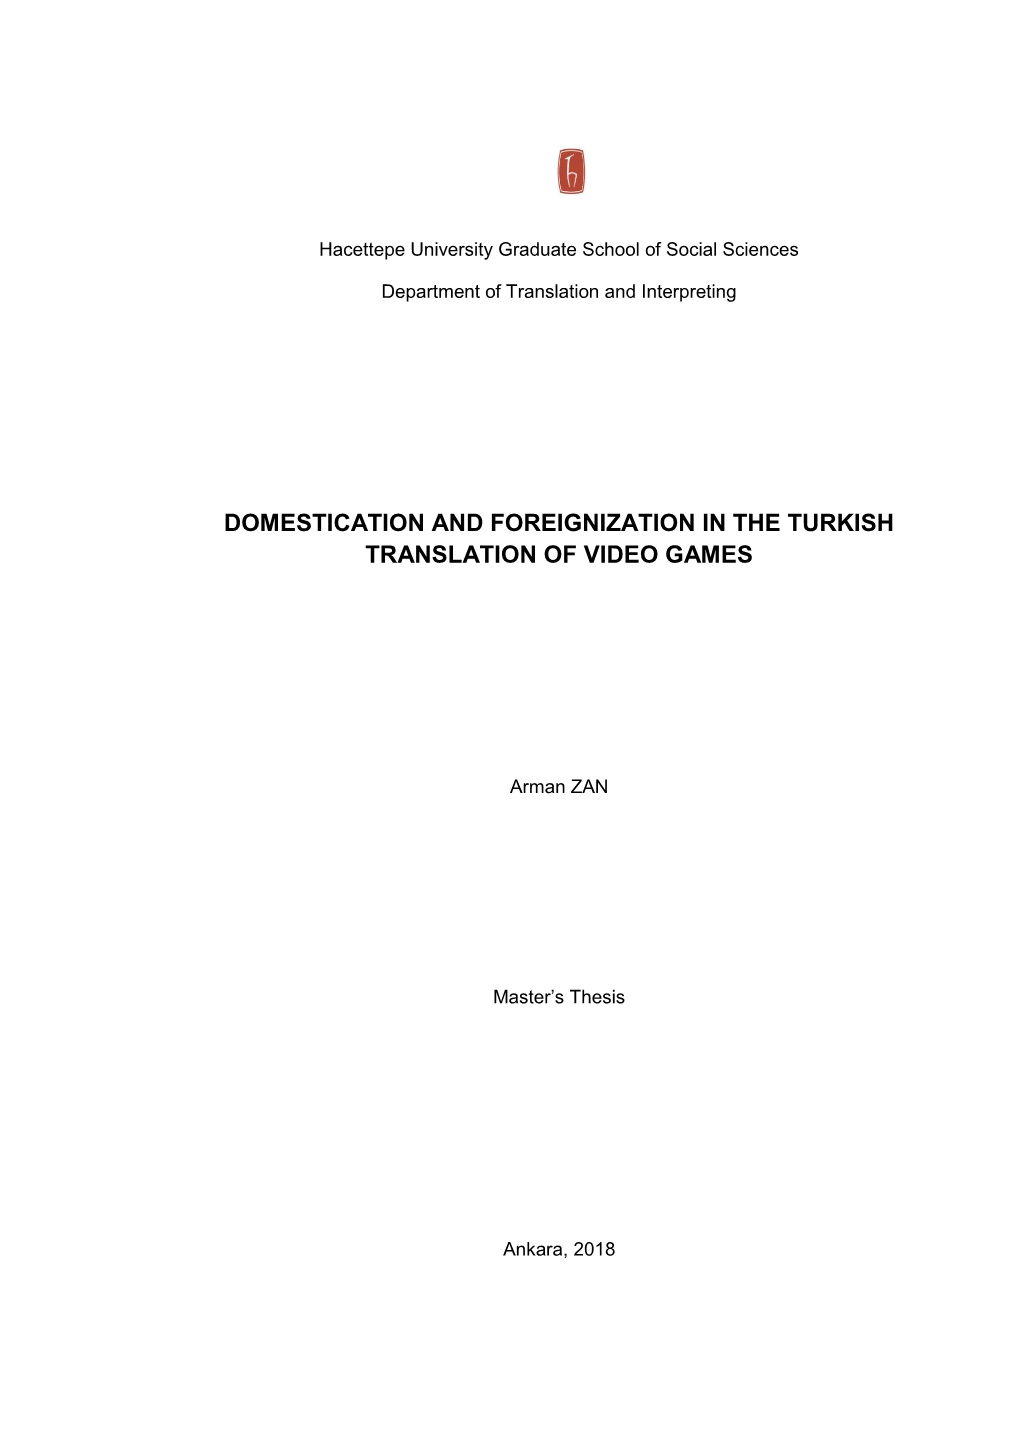 Domestication and Foreignization in the Turkish Translation of Video Games